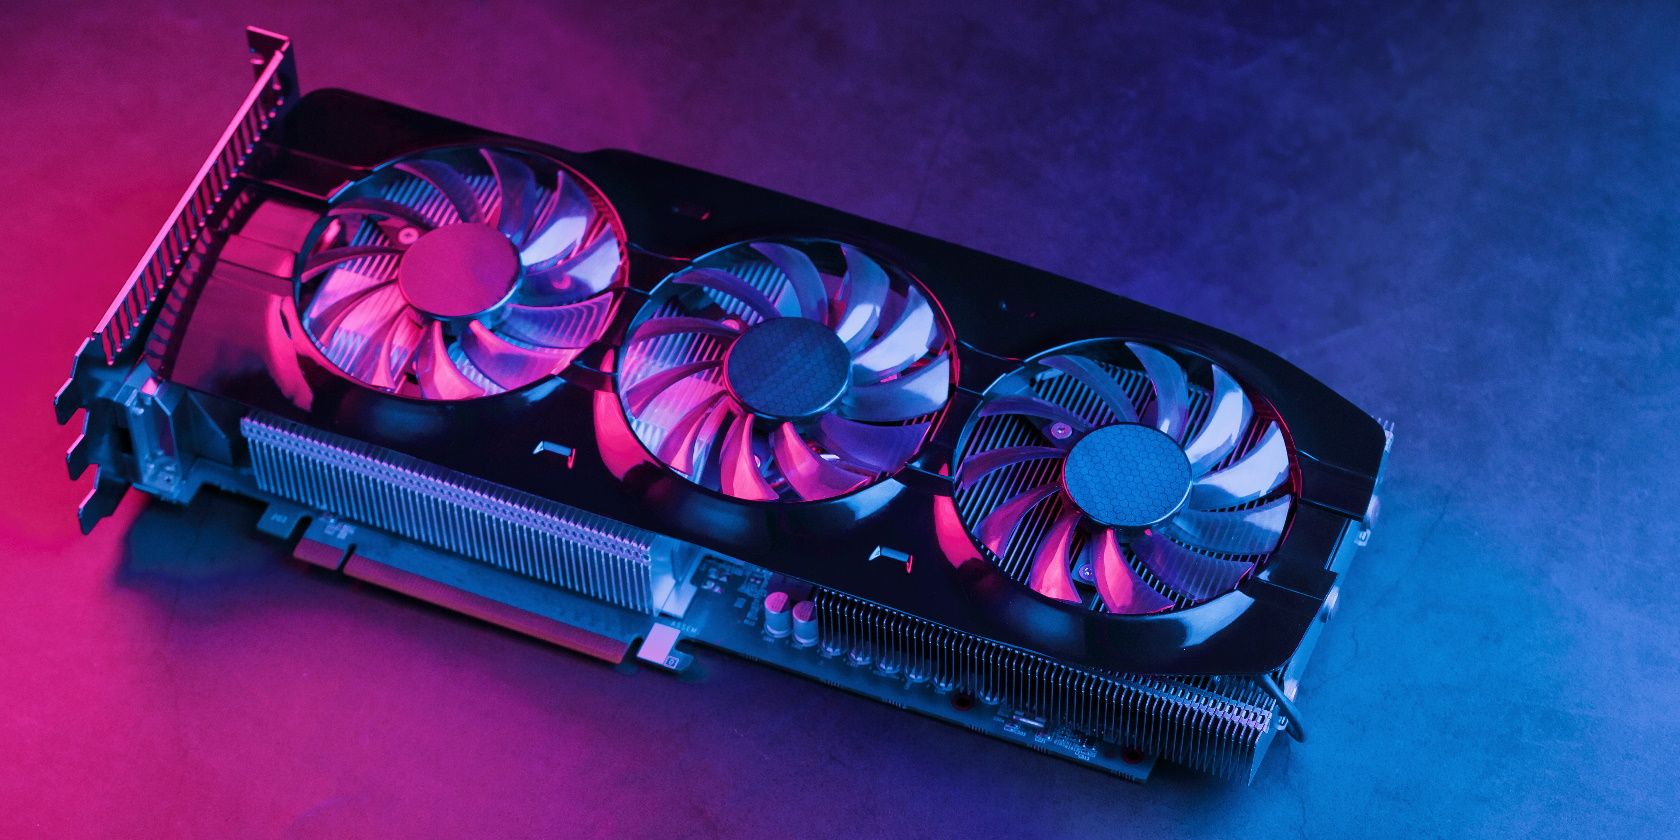 Large and powerful graphics card with three fans with blue pink light. The concept of a cyberpunk video chip for gaming and cryptocurrency mining. Dark key, top view